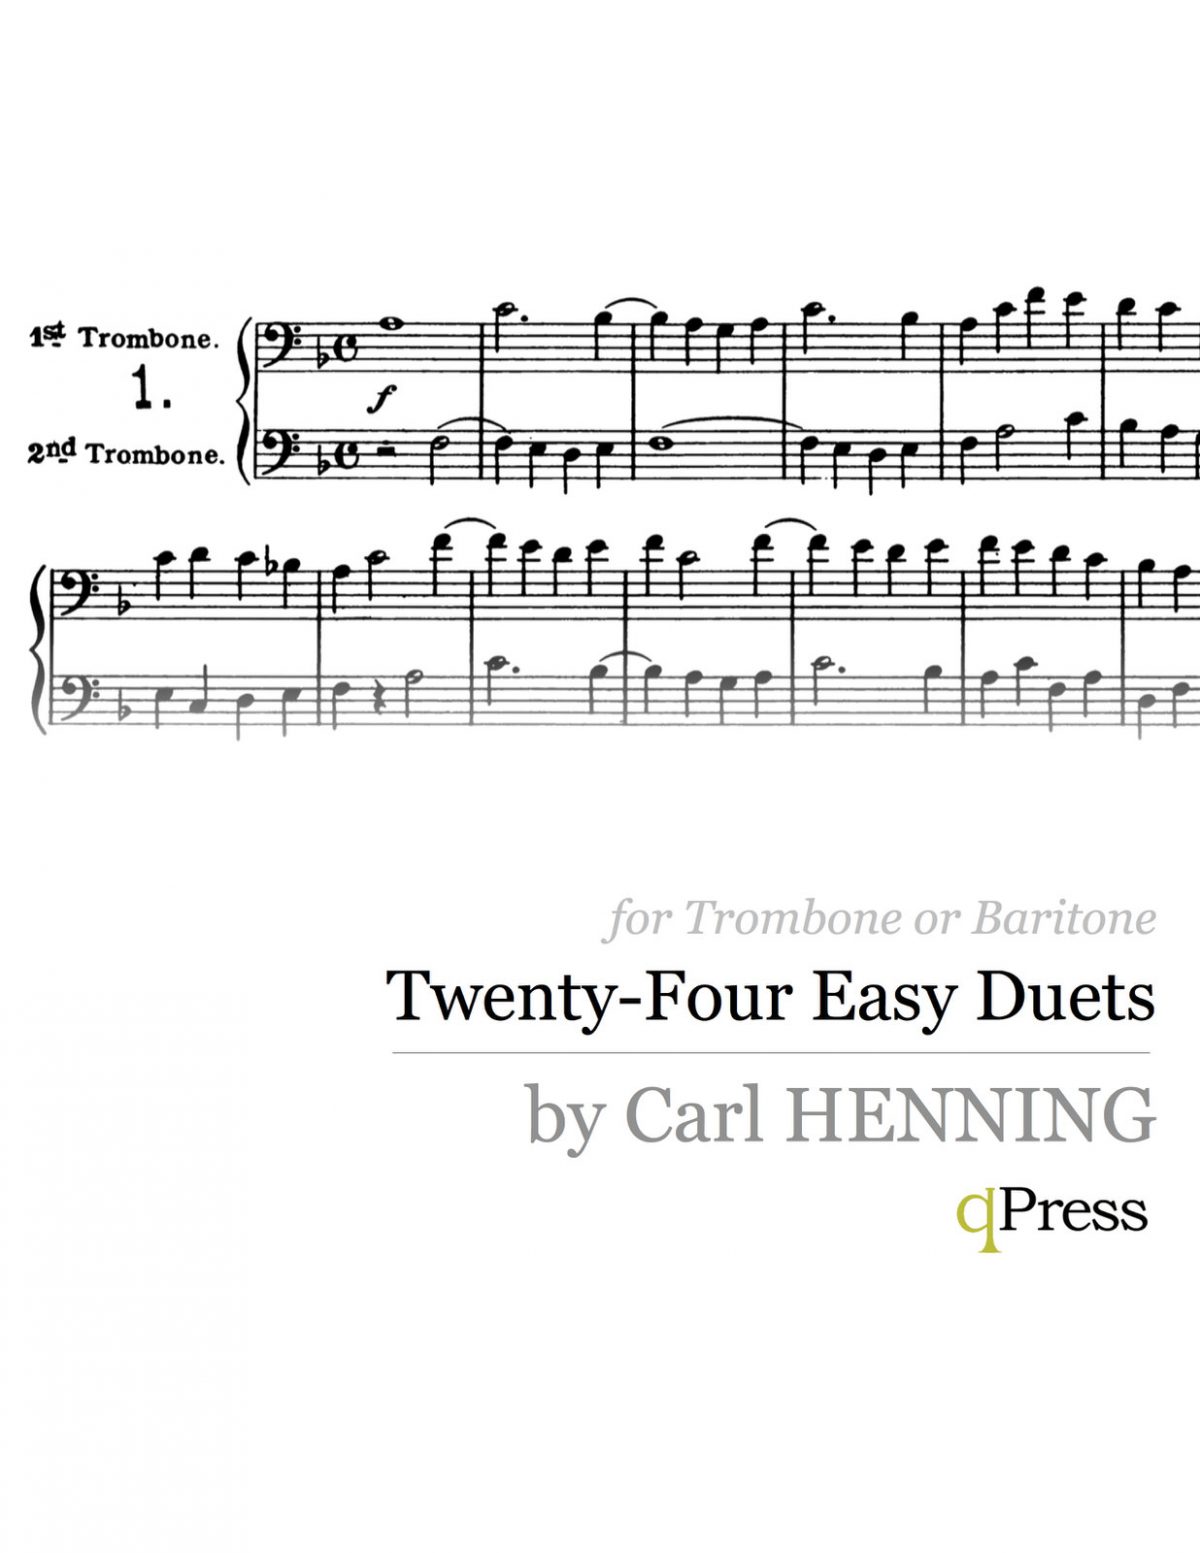 Henning, 24 Easy Duets for Trombone or Baritone